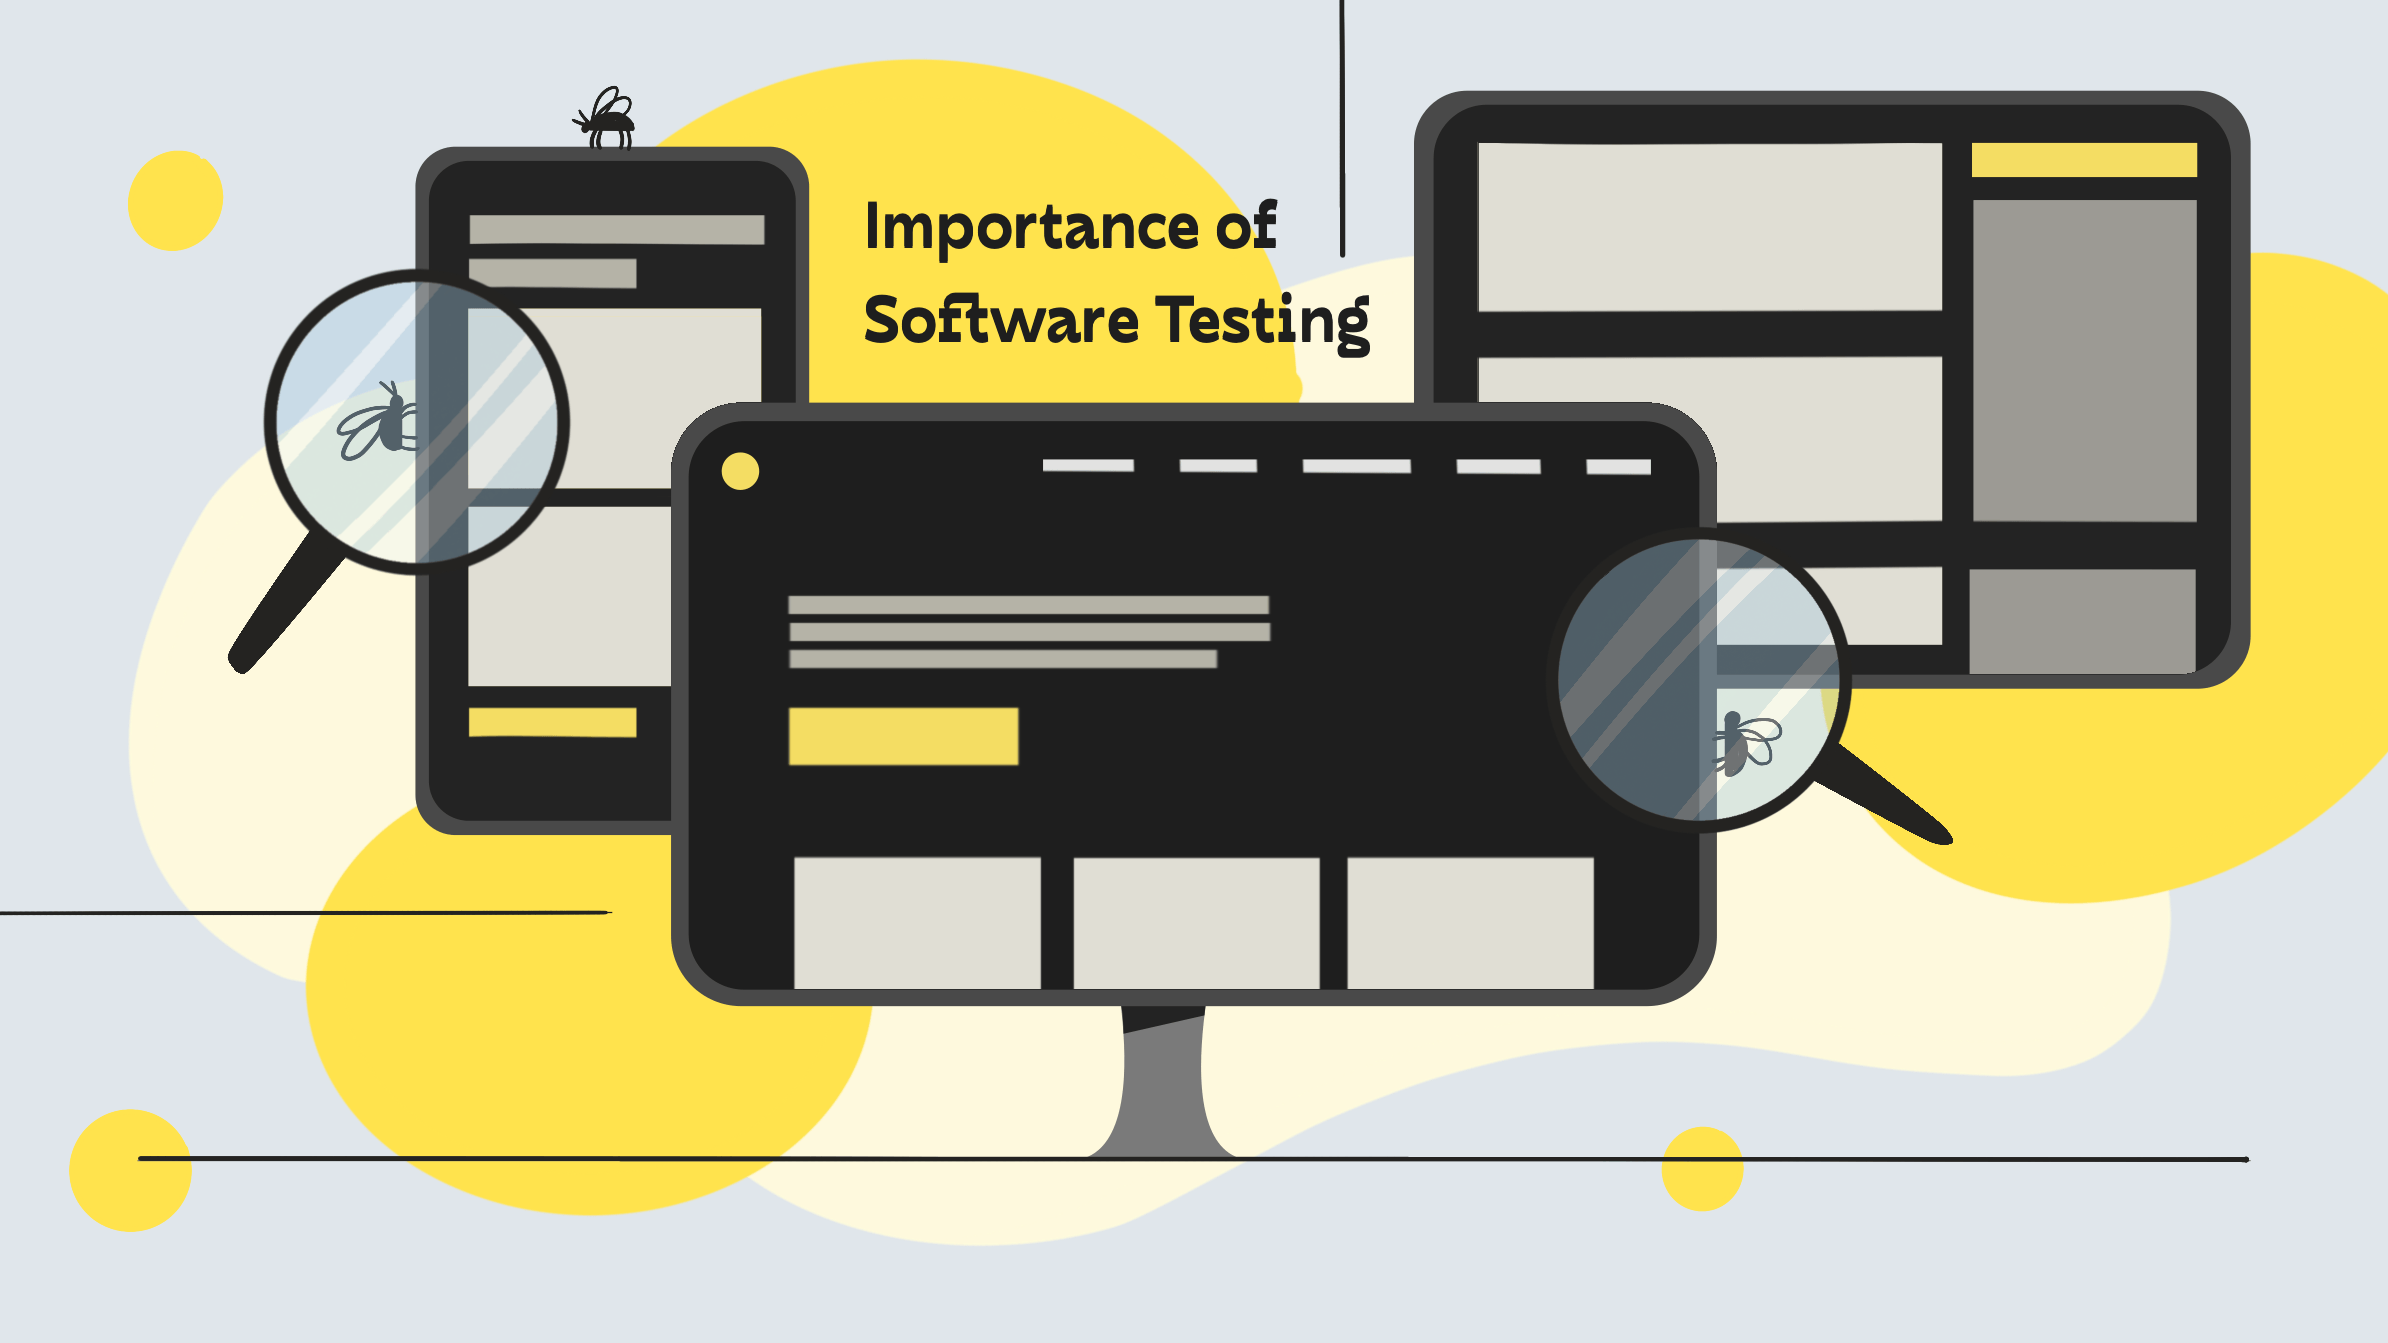 The Importance of Software Testing banner